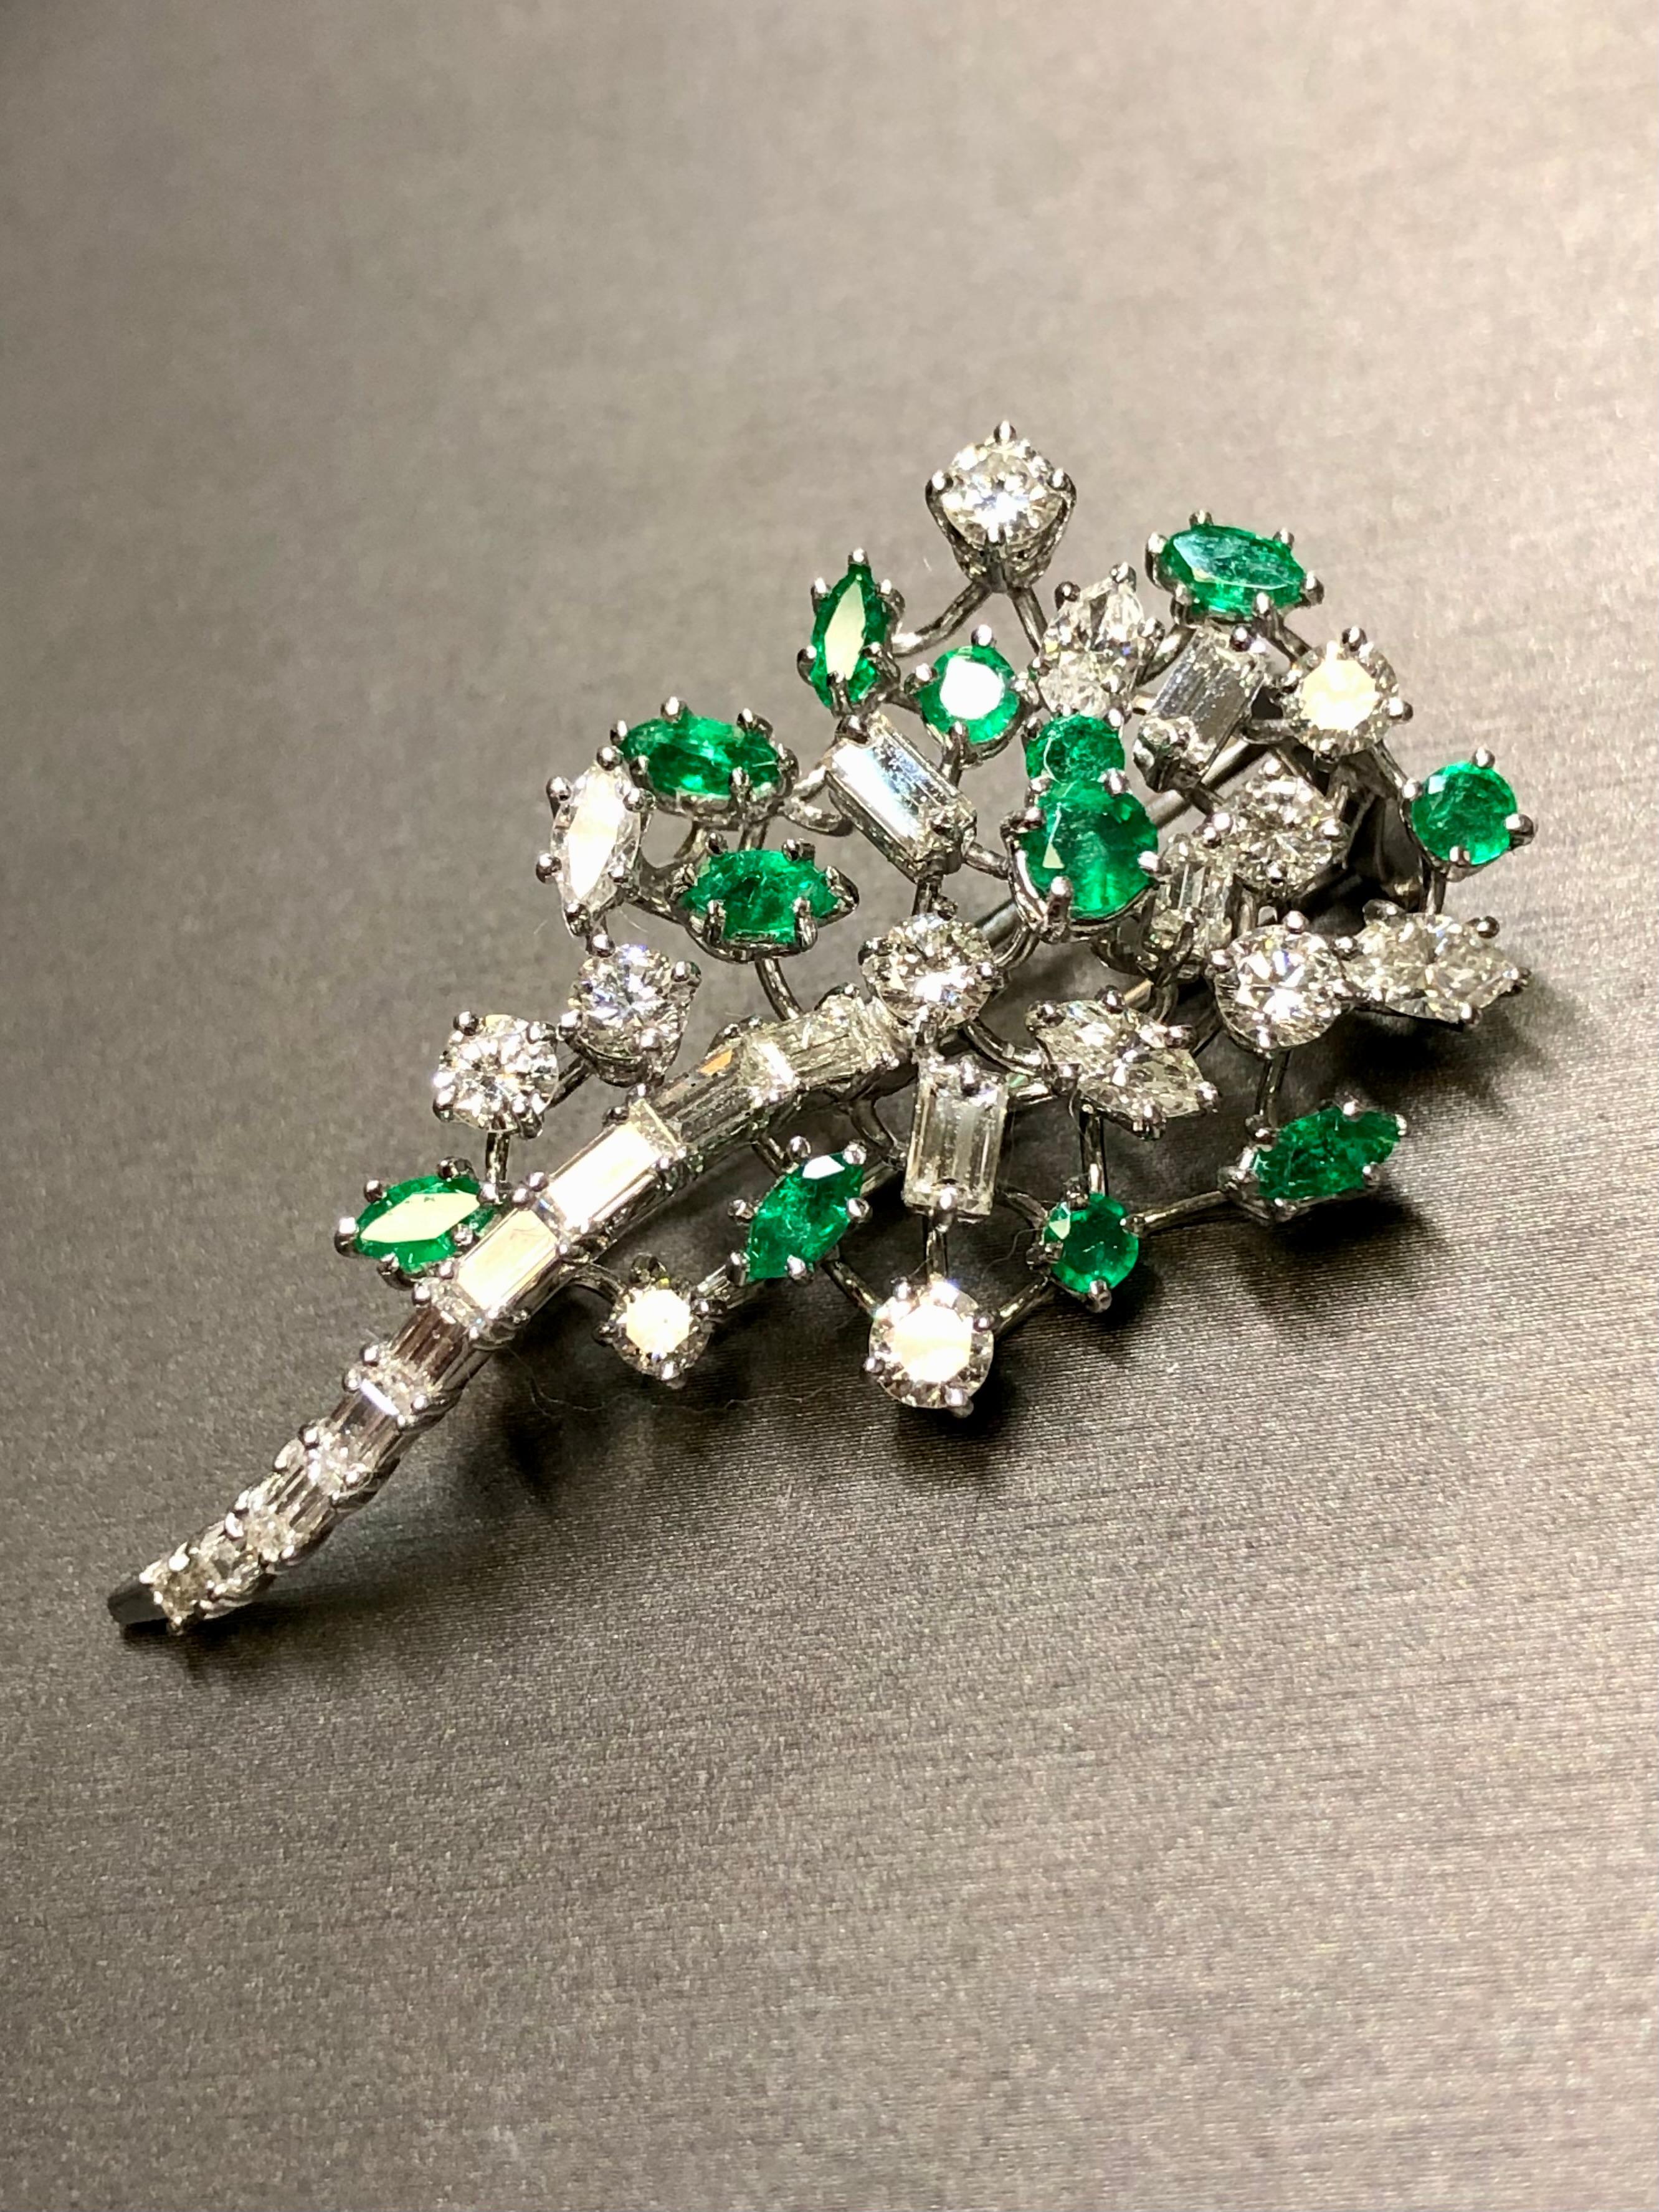 Vintage Platinum Fancy Diamond Emerald Spray Brooch Pin 5.80cttw G Vs In Good Condition For Sale In Winter Springs, FL